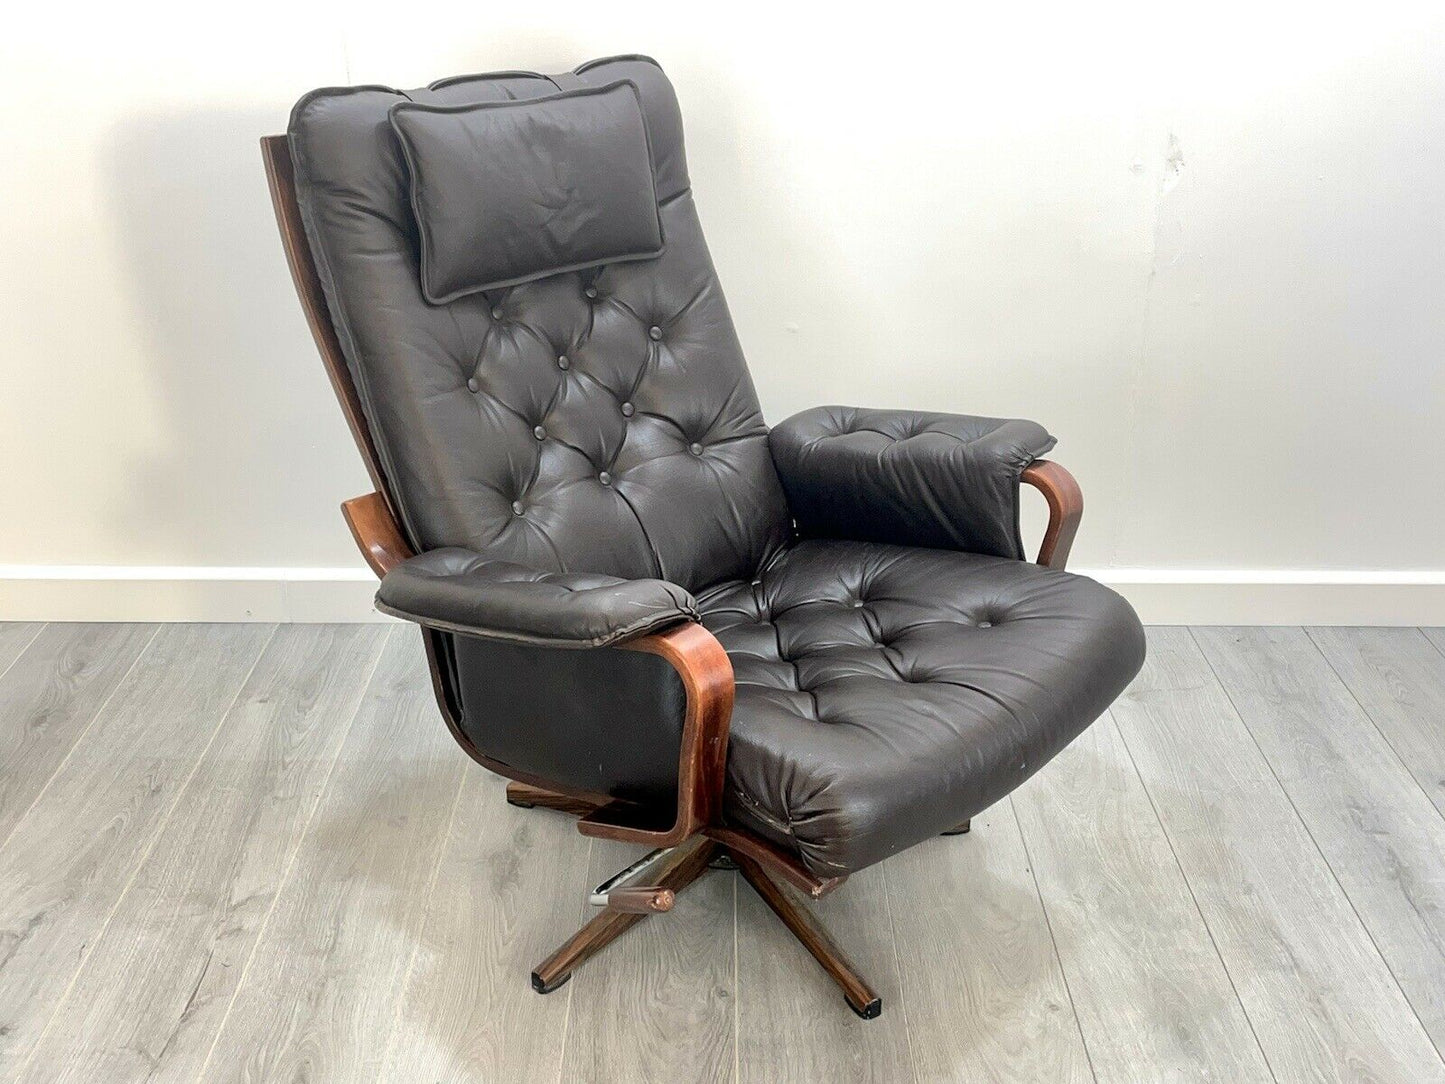 Westnofa Style, Brown Leather Recliner Swivel Chair